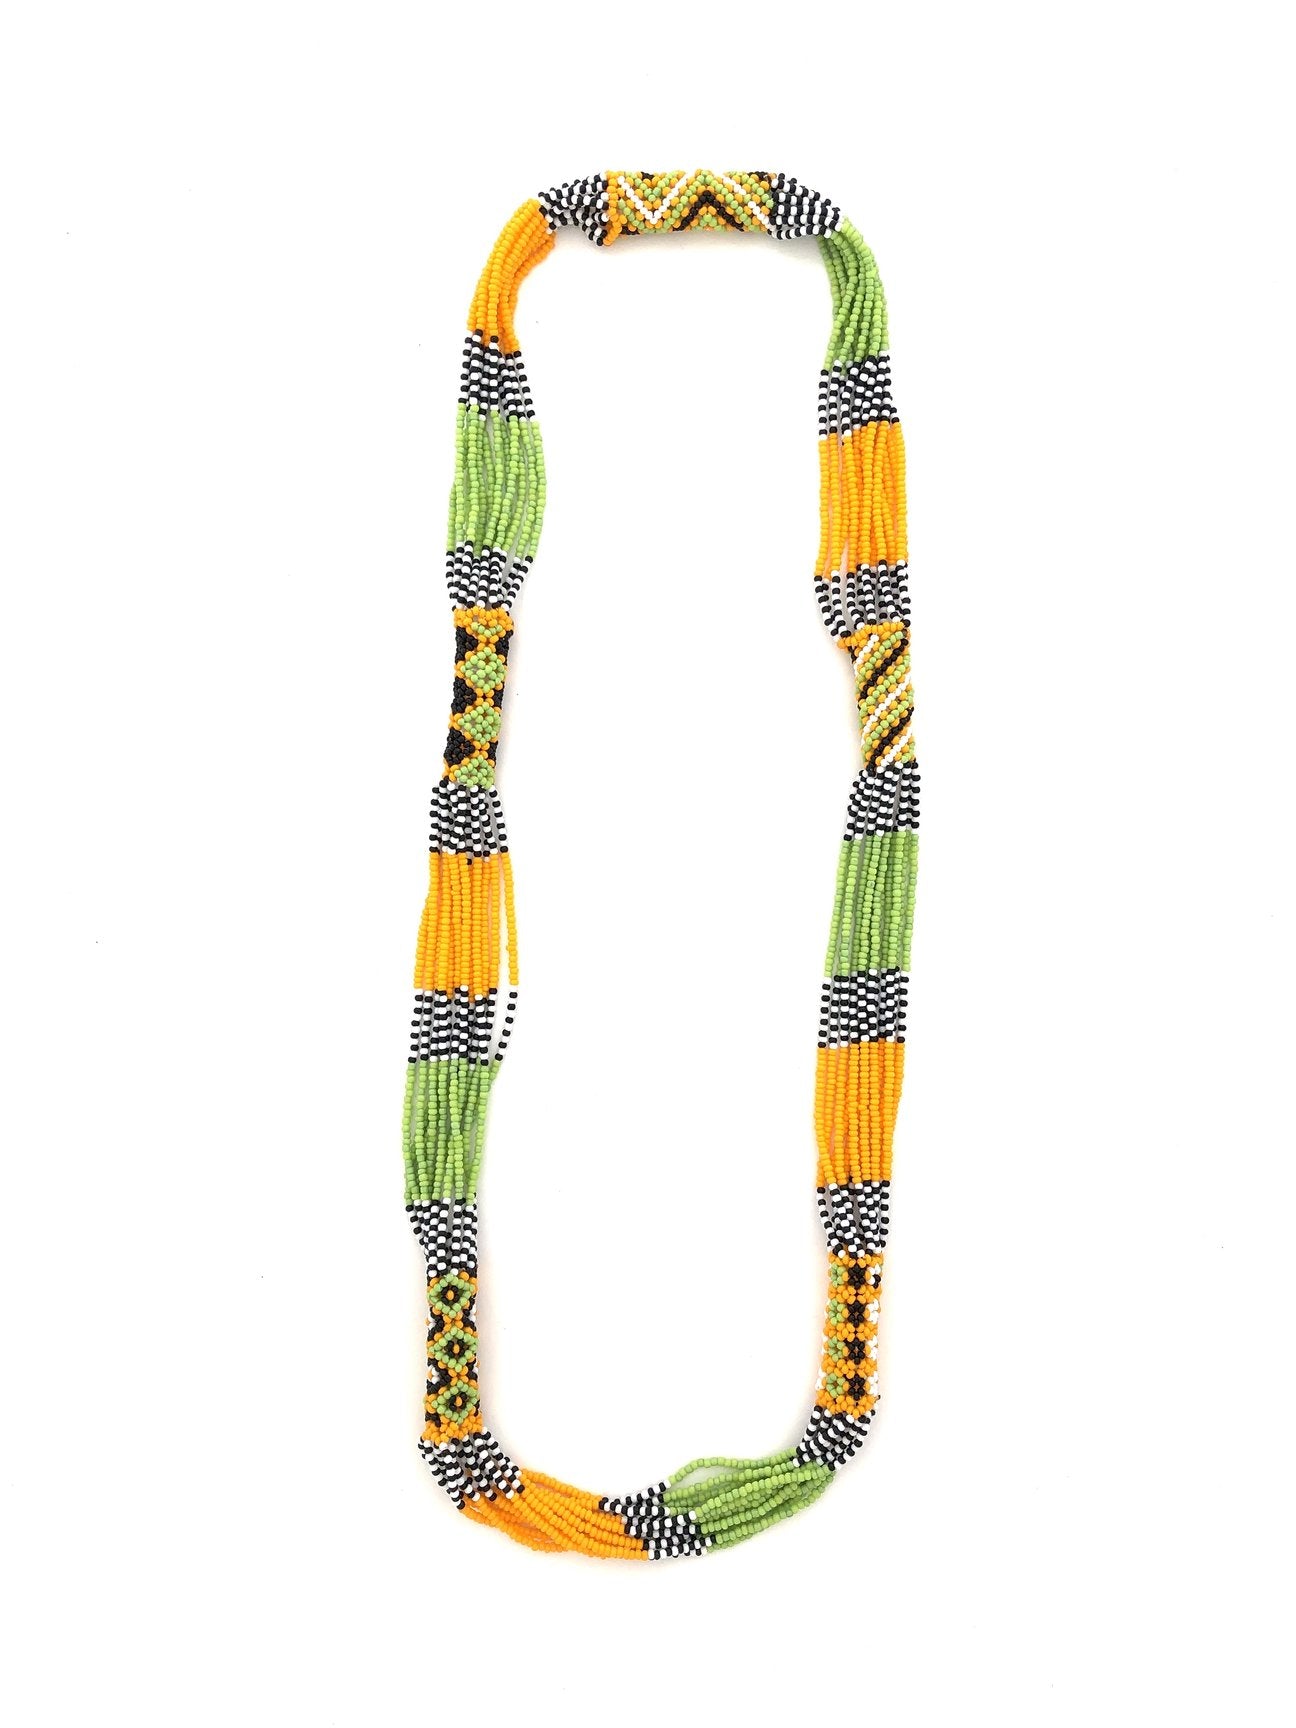 BEADED TRIBAL NECKLACE - CITRUS